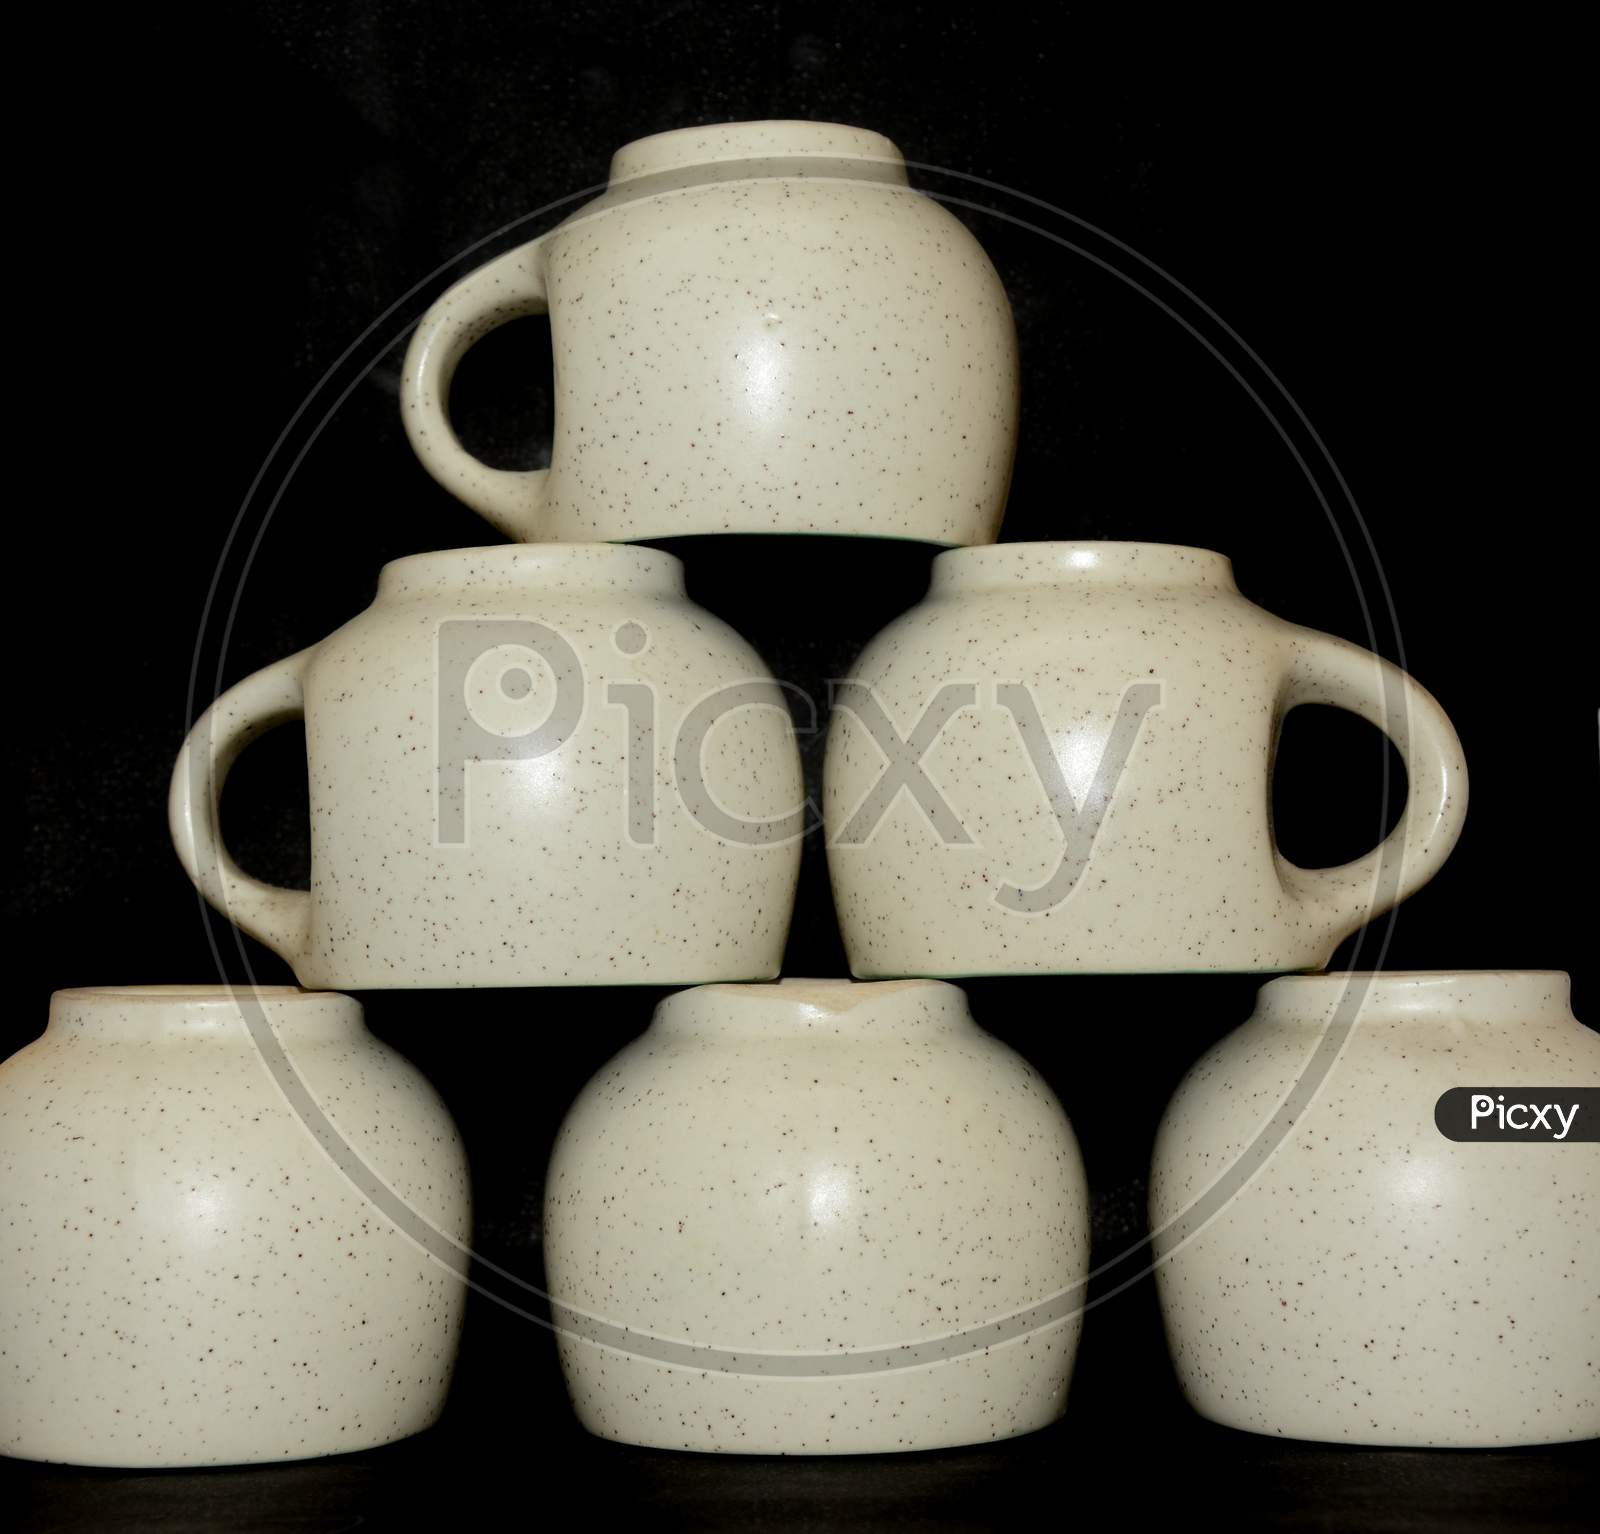 Close up of tea cup set, dotted cups, selective focus, black background.